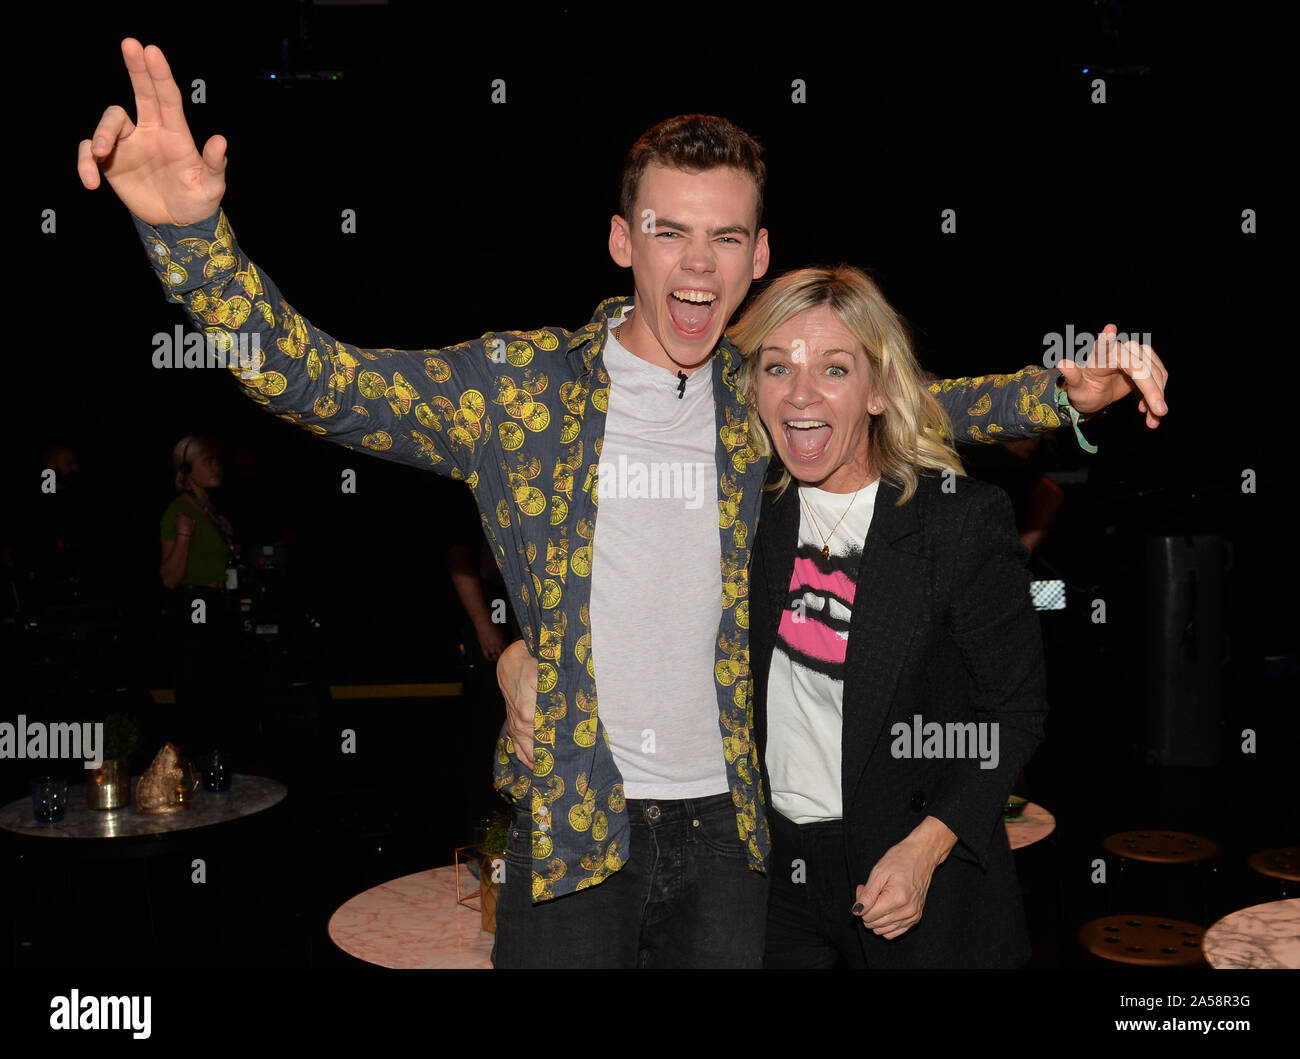 Finalist Woody Cook with his mother, Zoe Ball, following the live final of the second series of Channel 4's The Circle, in Salford, Manchester. Stock Photo